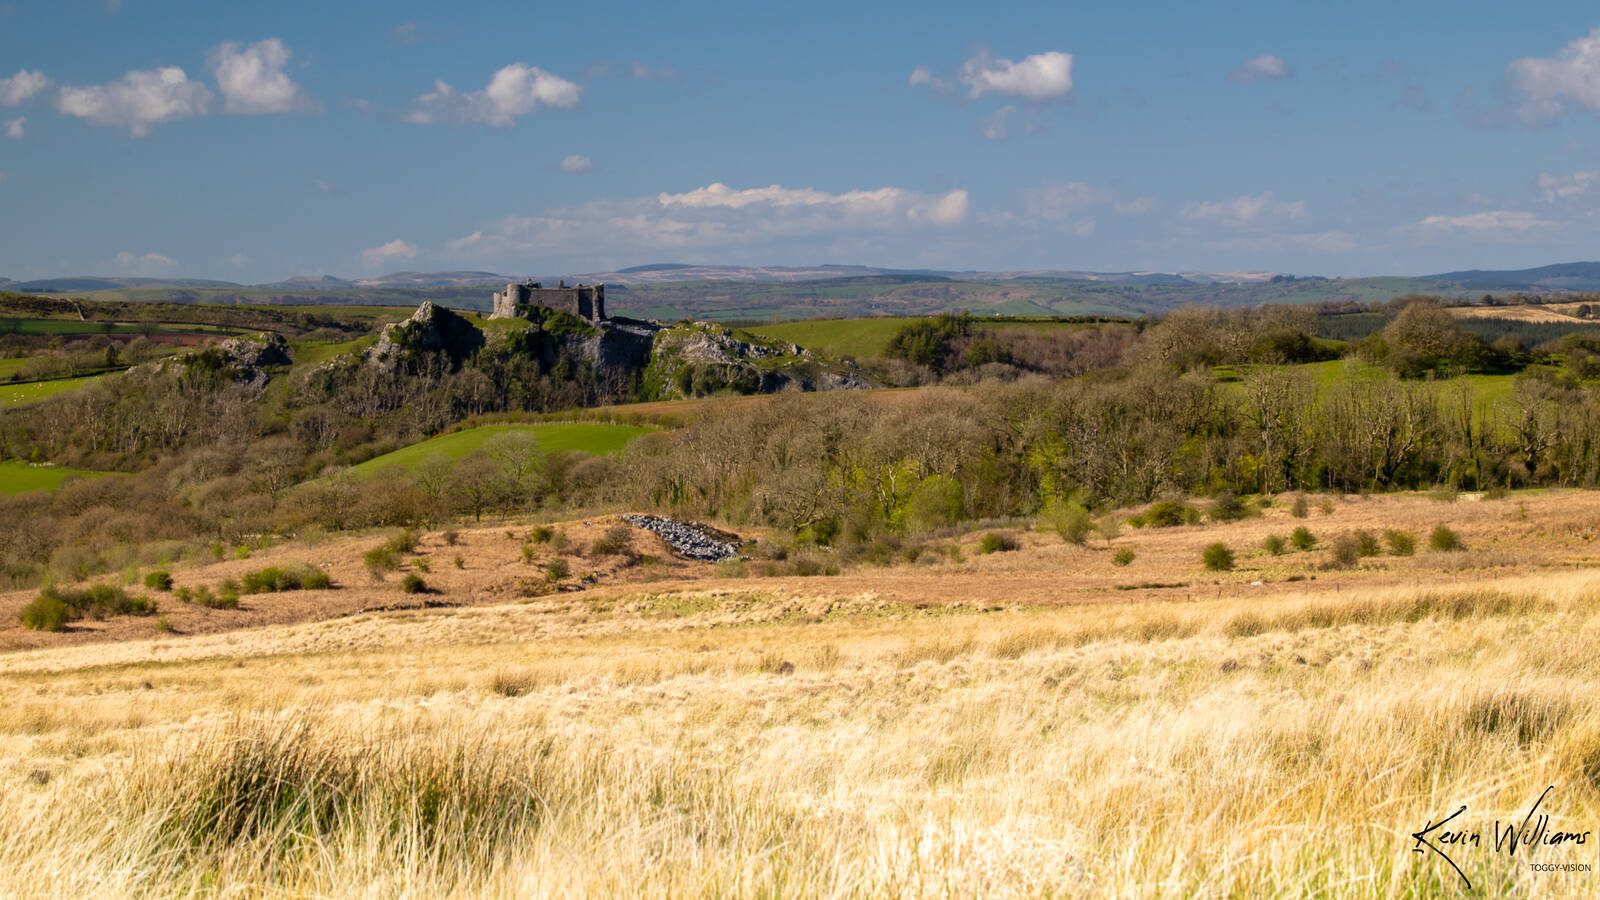 Image of Carreg Cennen Castle - South Viewpoint by Kev Williams